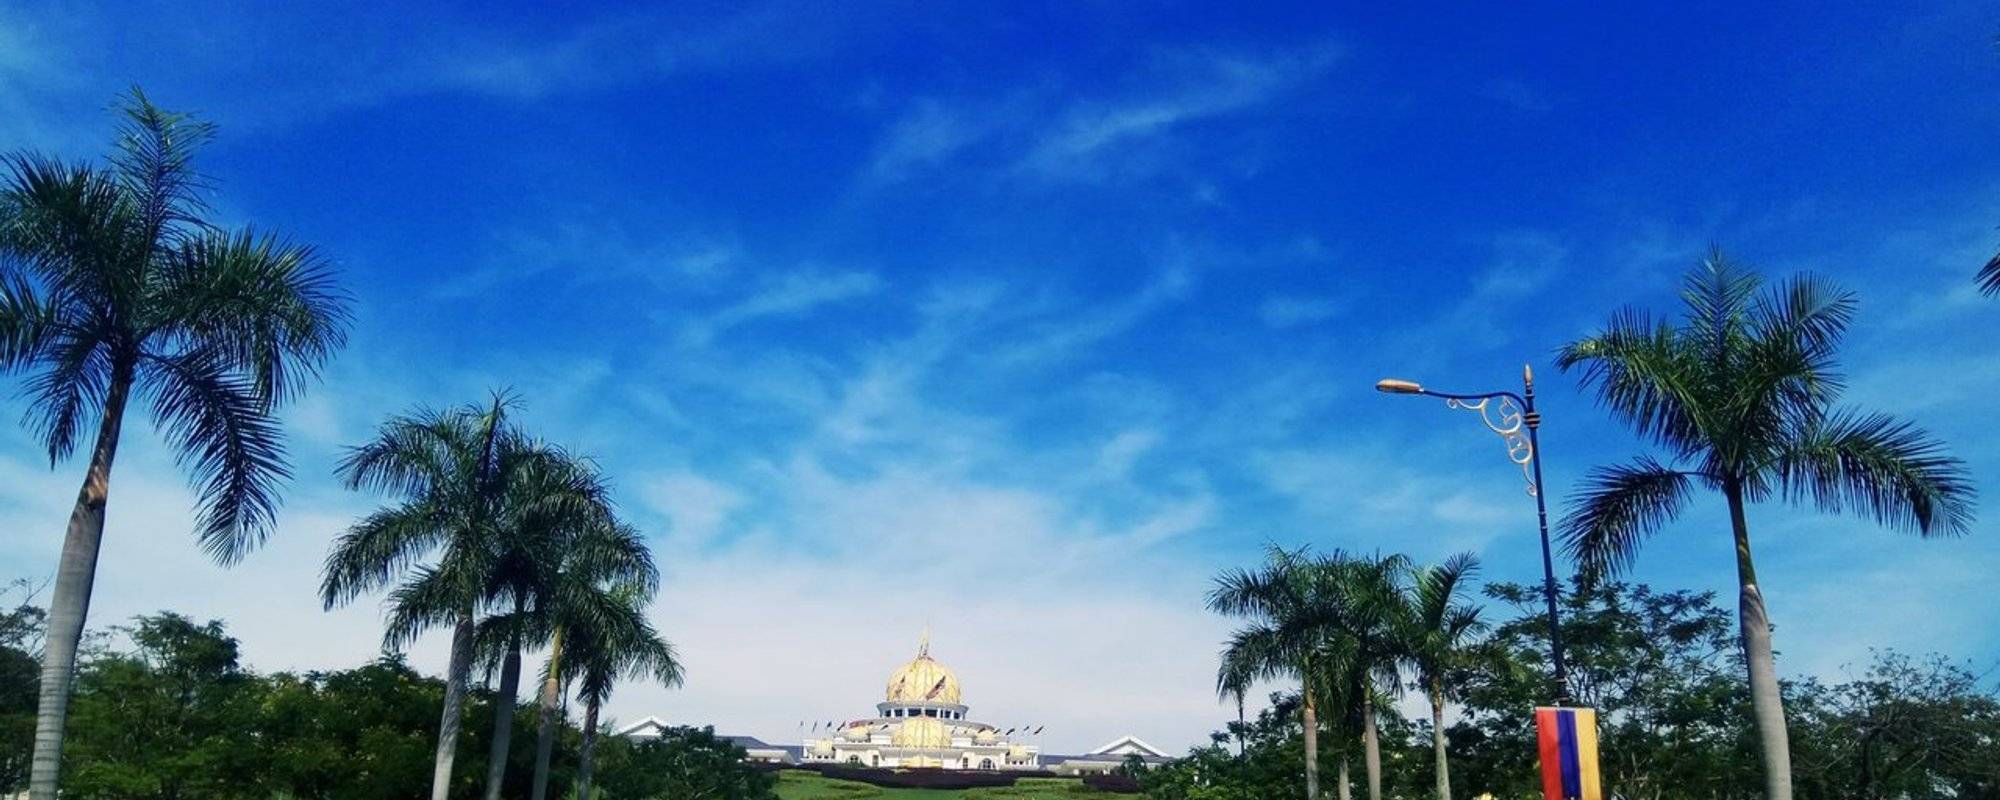 The Magnificent Malaysian National Palace